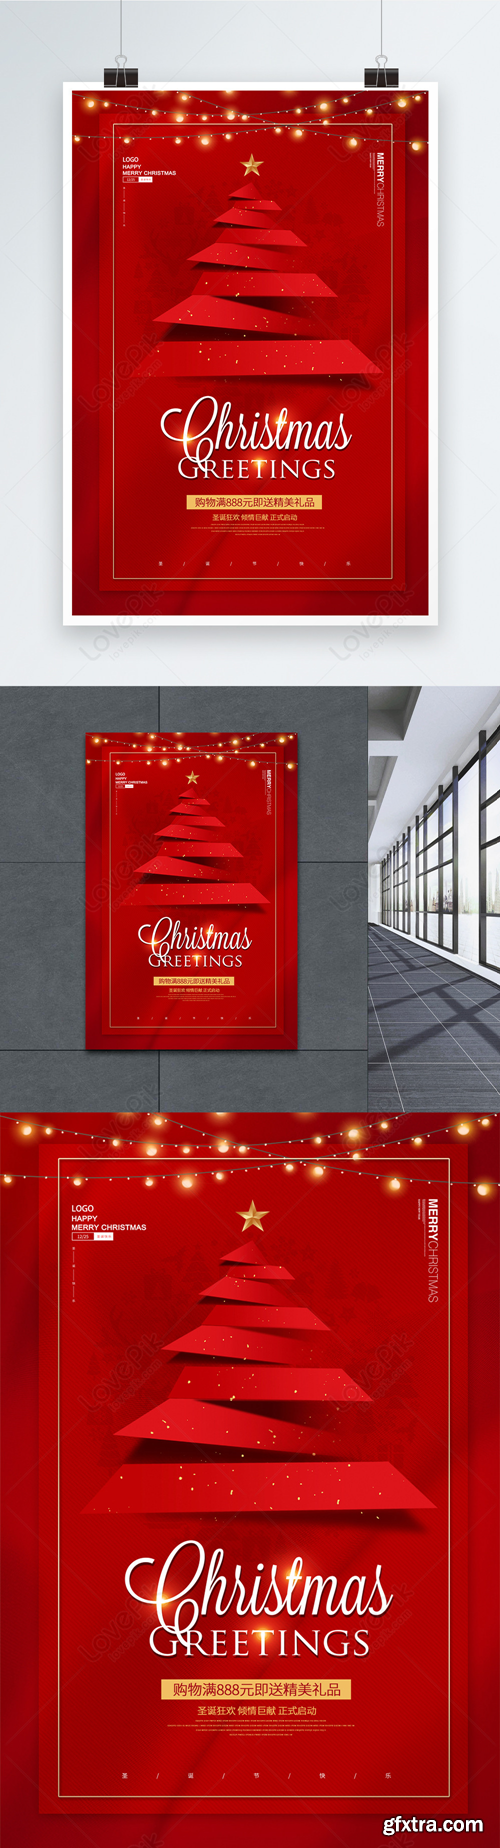 red christmas holiday promotion poster